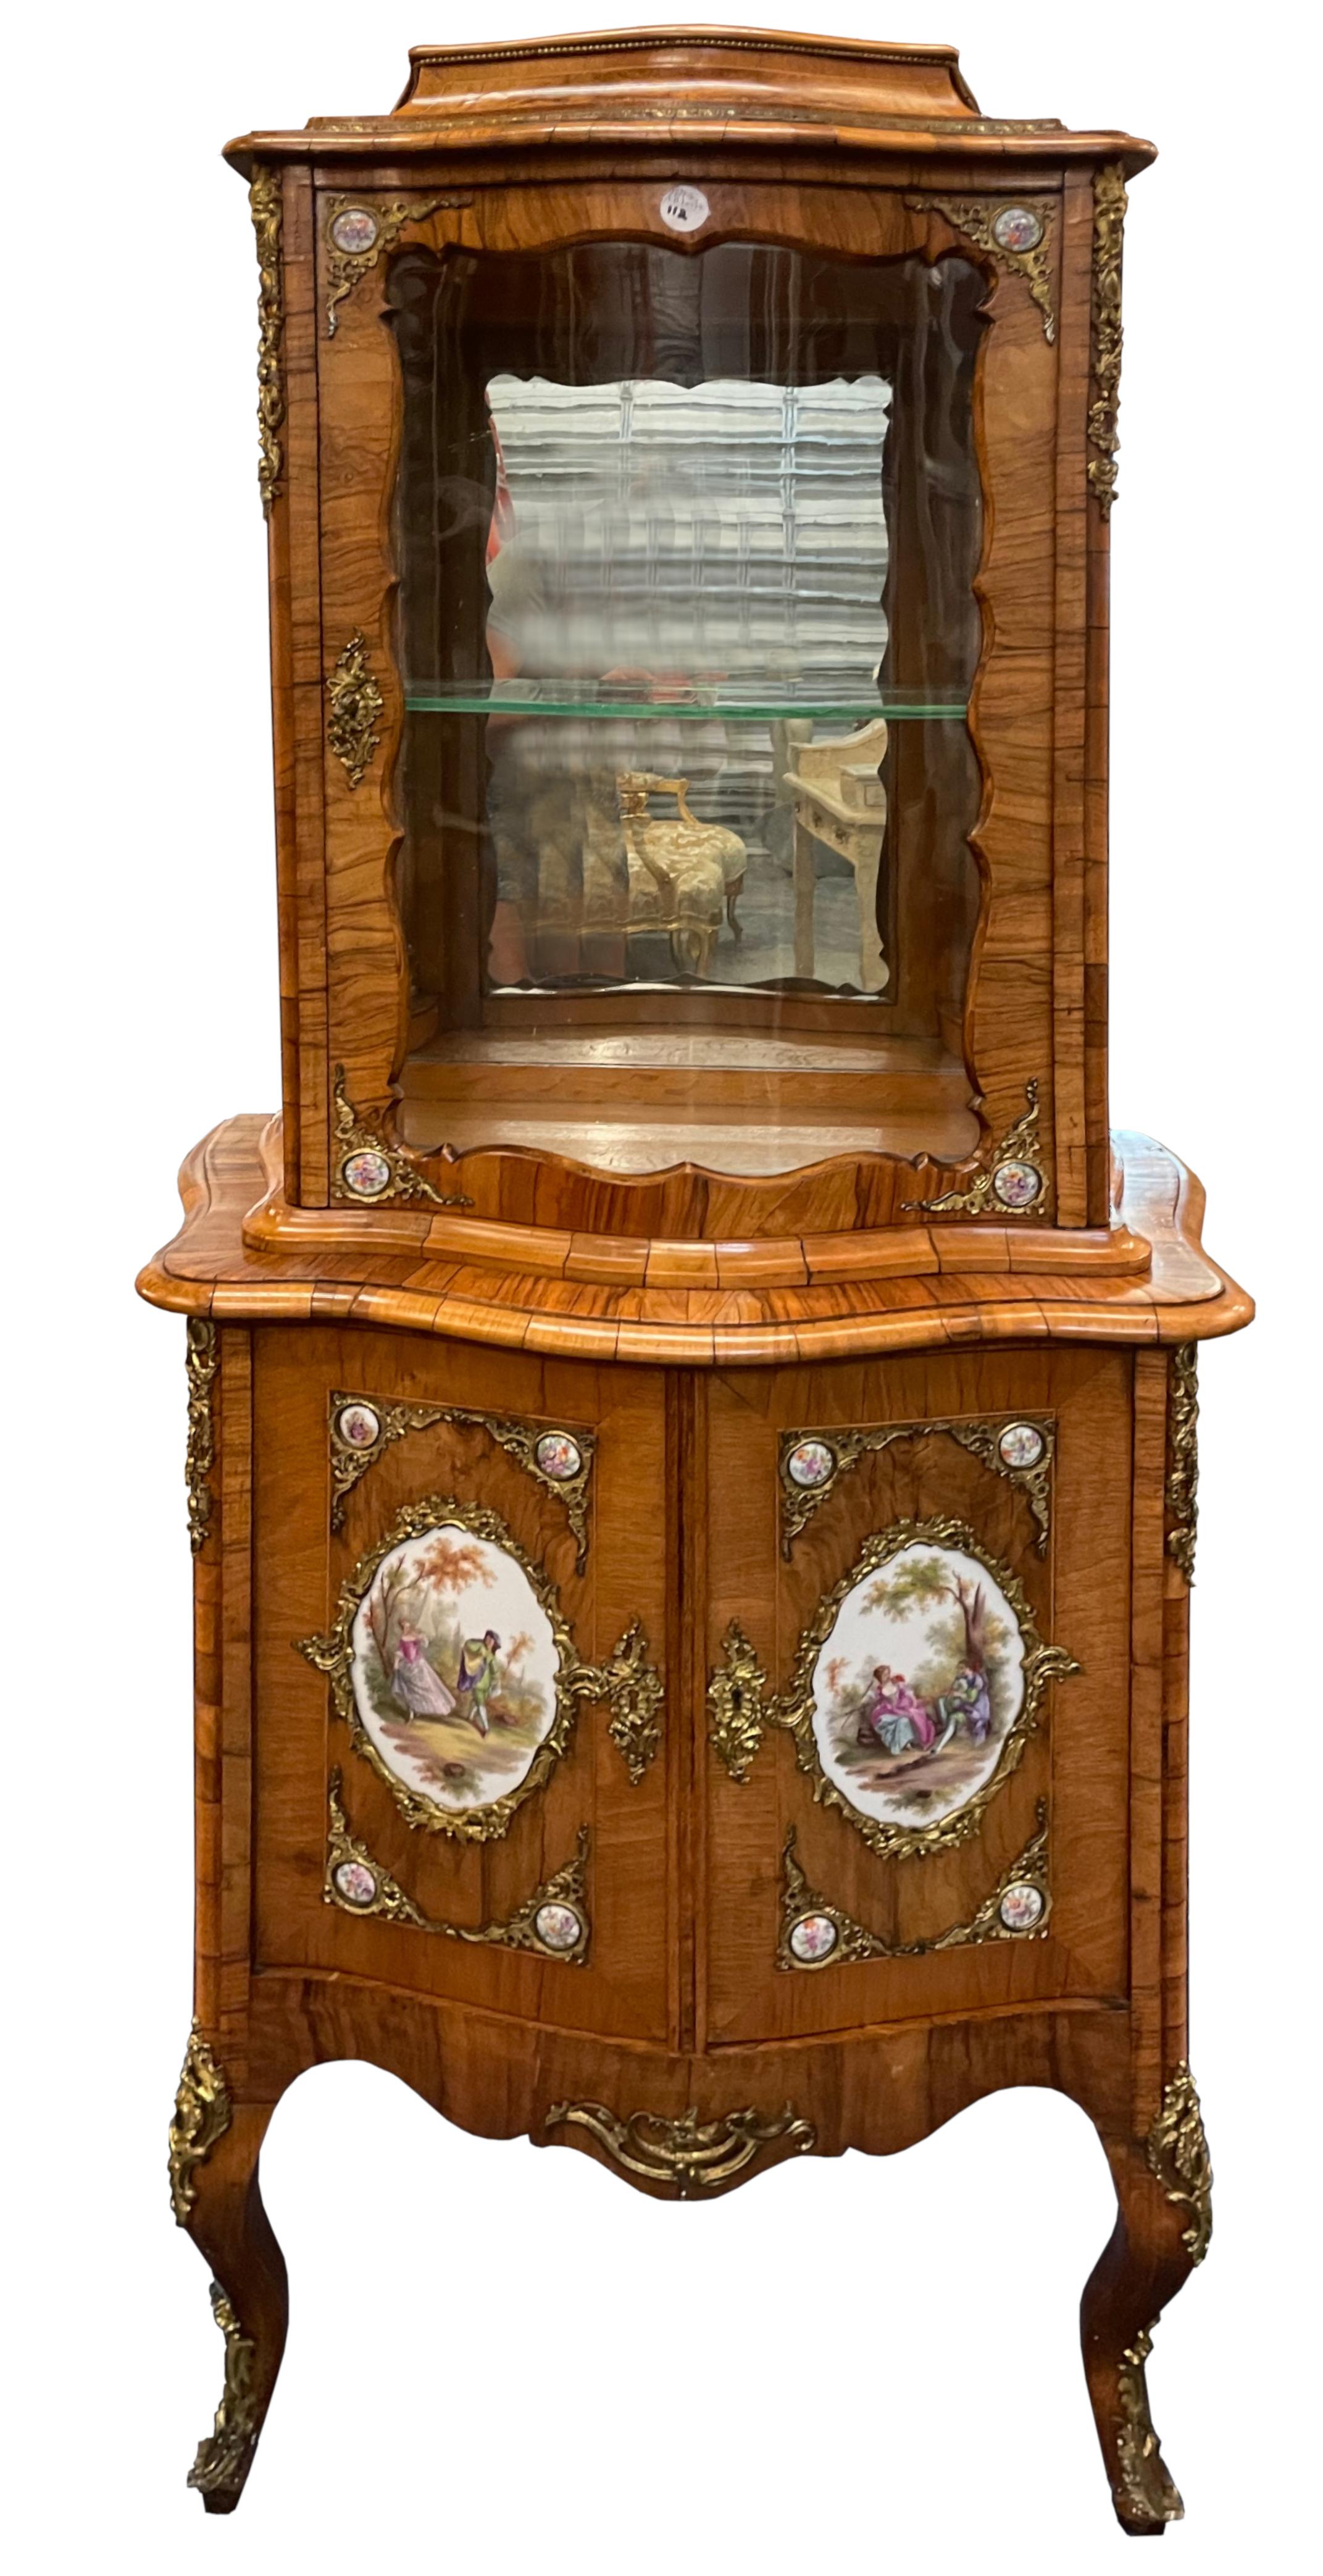 Louis XV Style Bronze & Porcelain-Mounted Walnut Vitrine Cabinet 
The recessed upper part with a nowed glazed door with glazed sides, the lower part with two serpentine-shaped doors, each fitted with a porcelain plaque decorated with an amorous